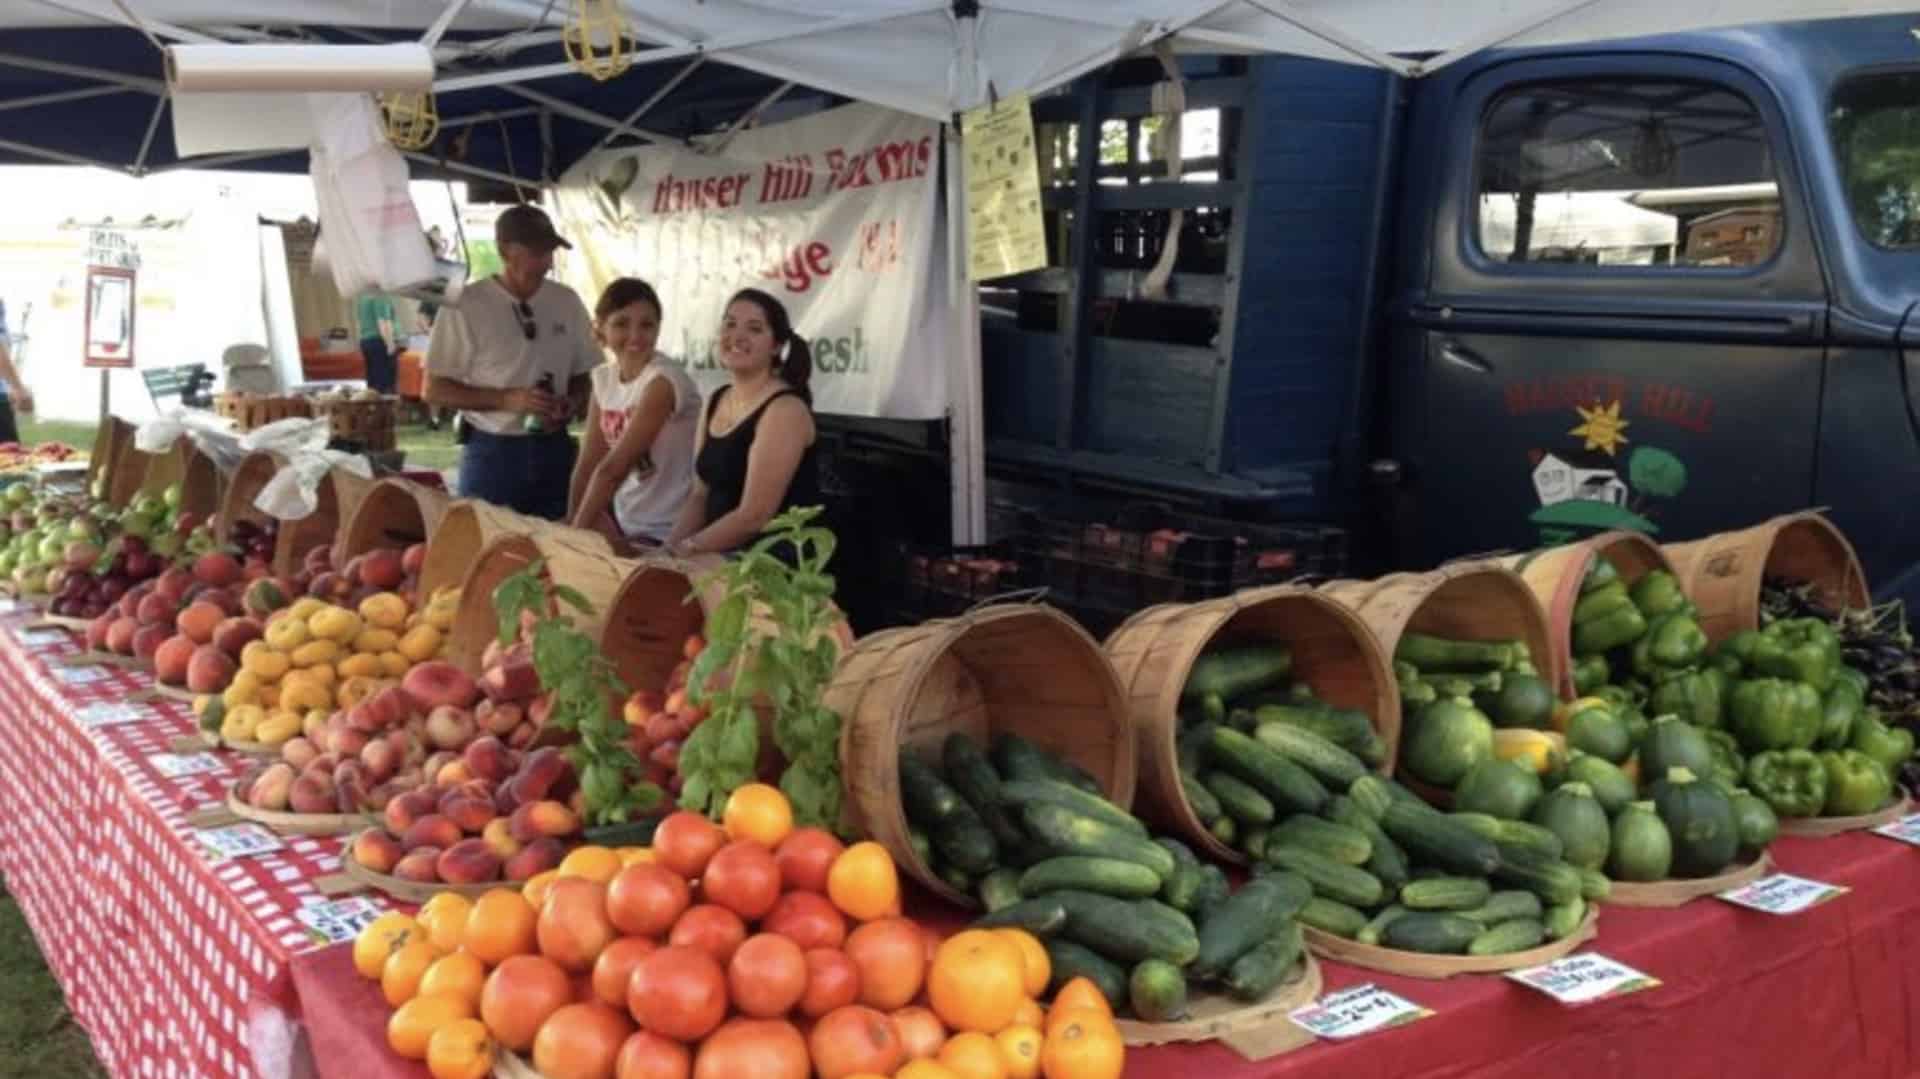 people sell produce at a farmers market